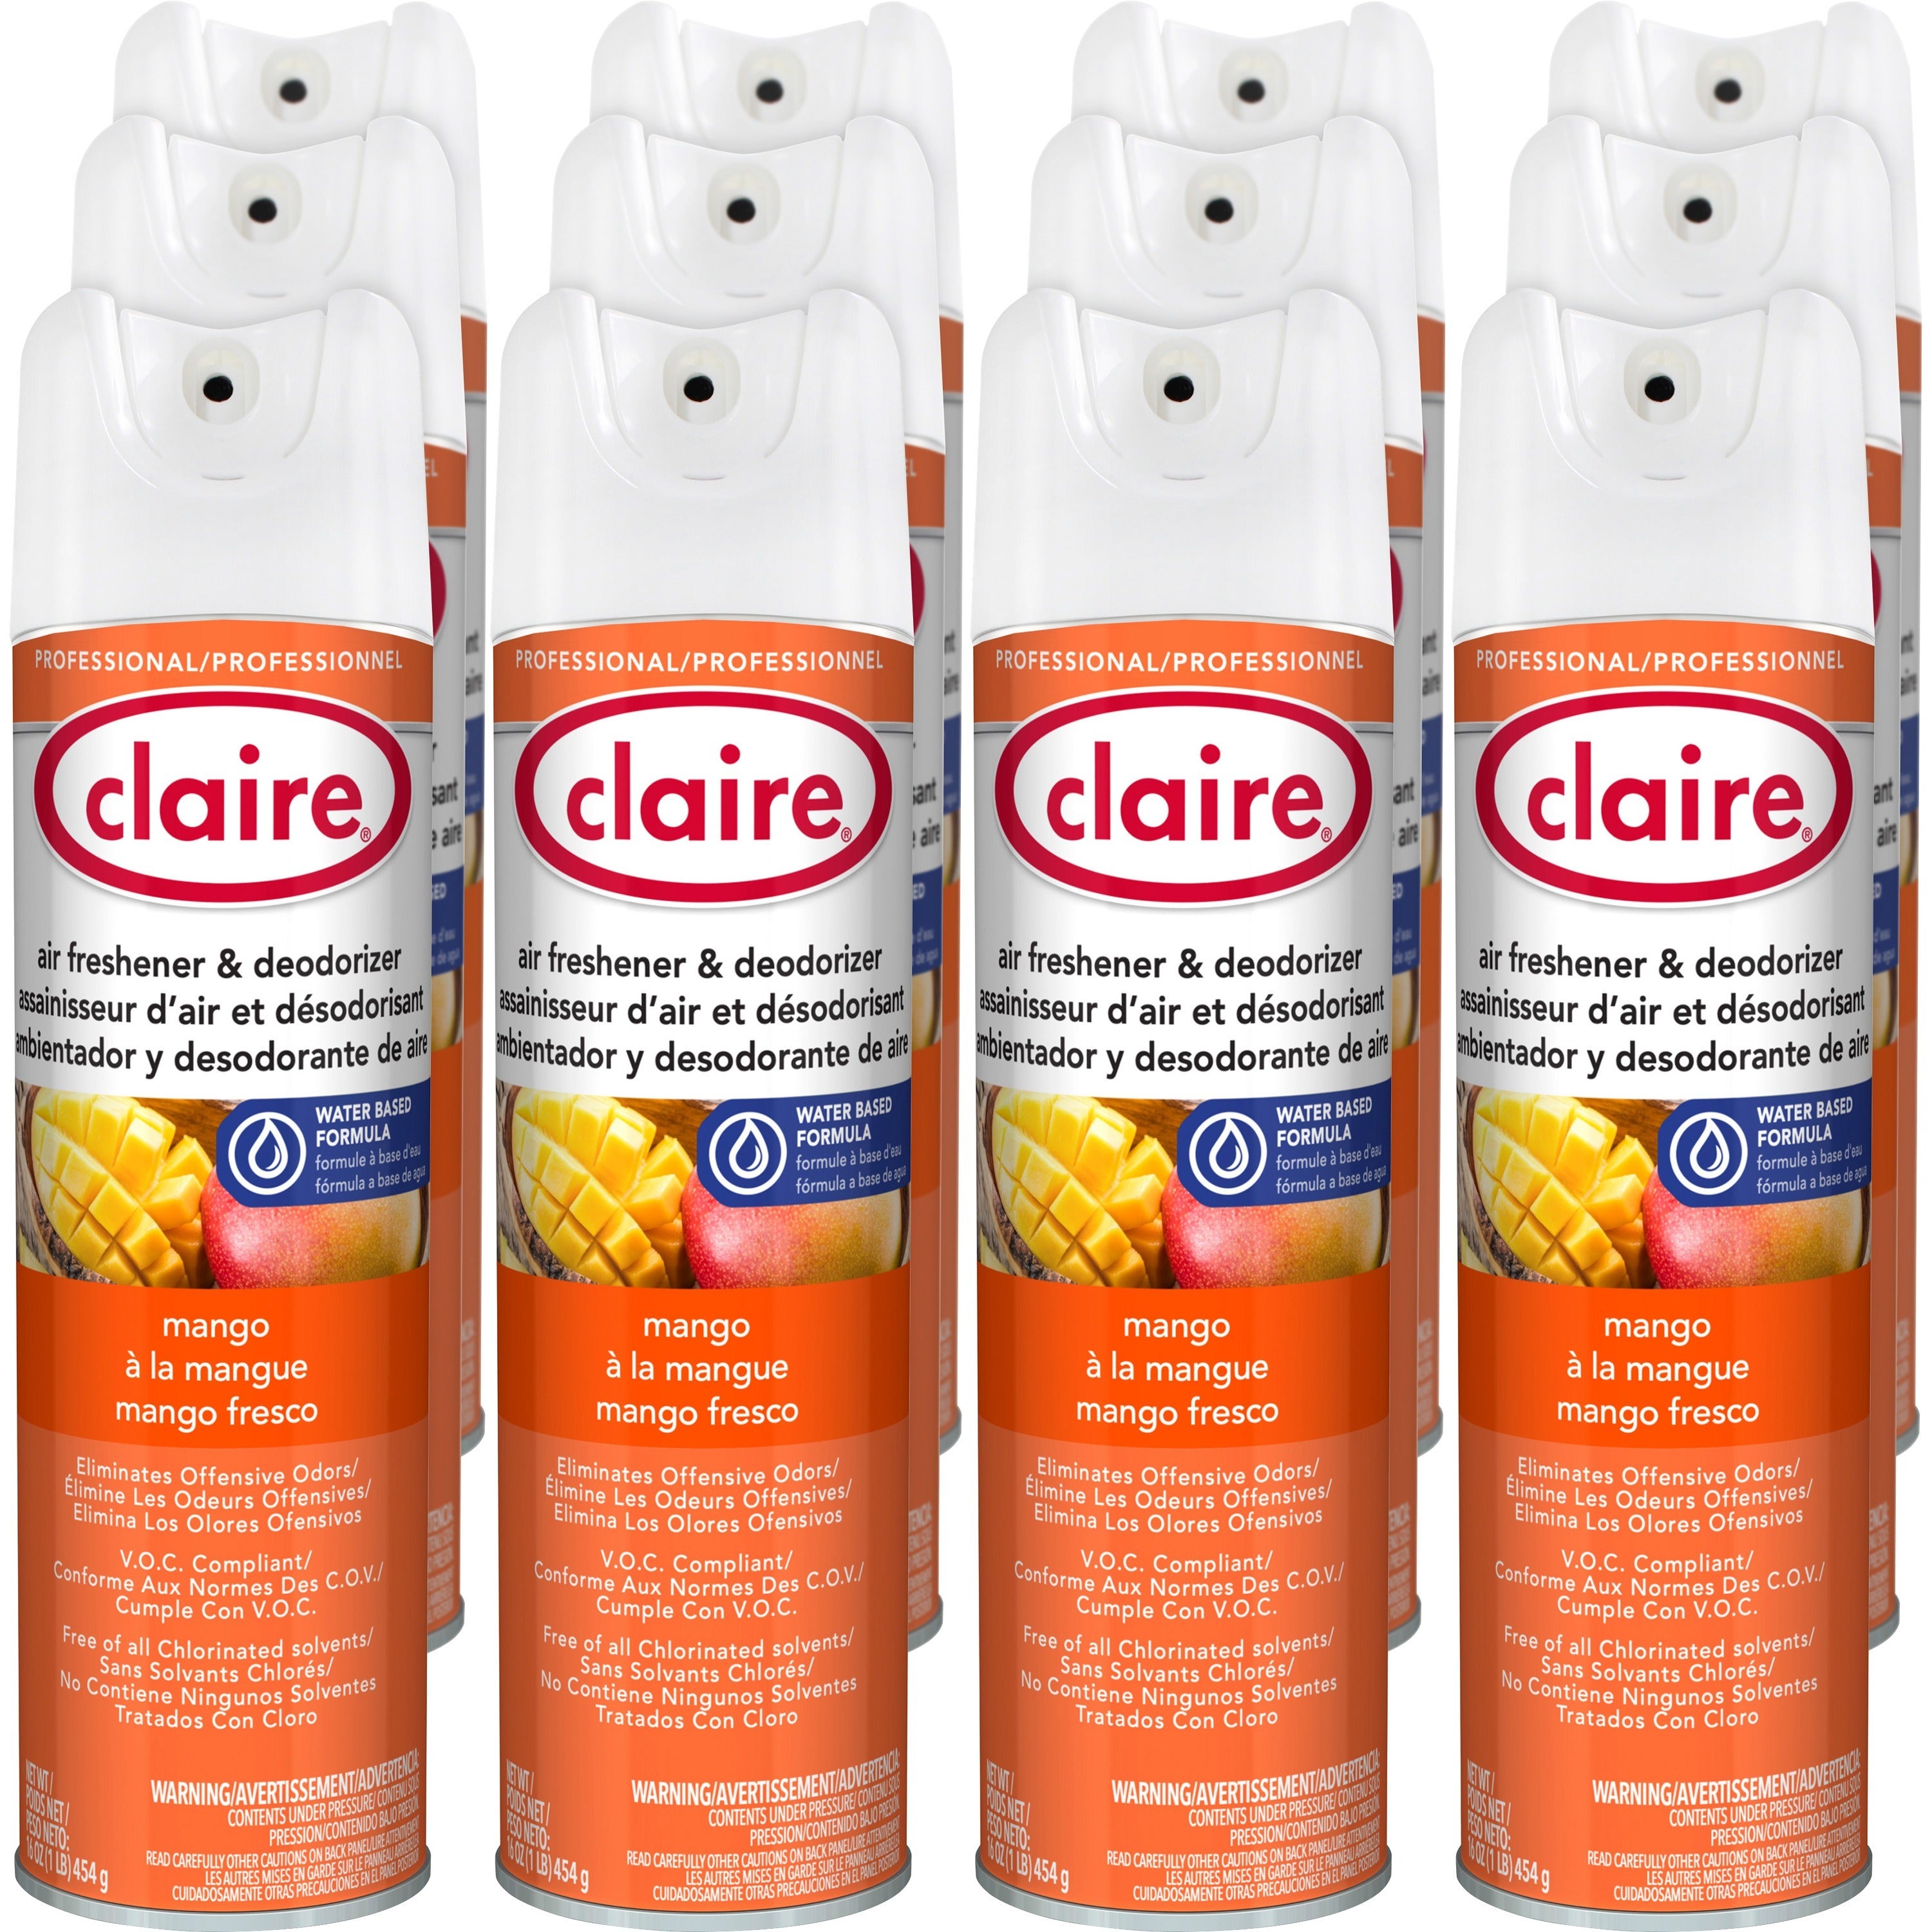 claire-water-based-air-freshener-spray-16-oz-mango-12-dozen-residue-free-non-staining-ozone-safe-odor-neutralizer-recyclable_cgccl341 - 1